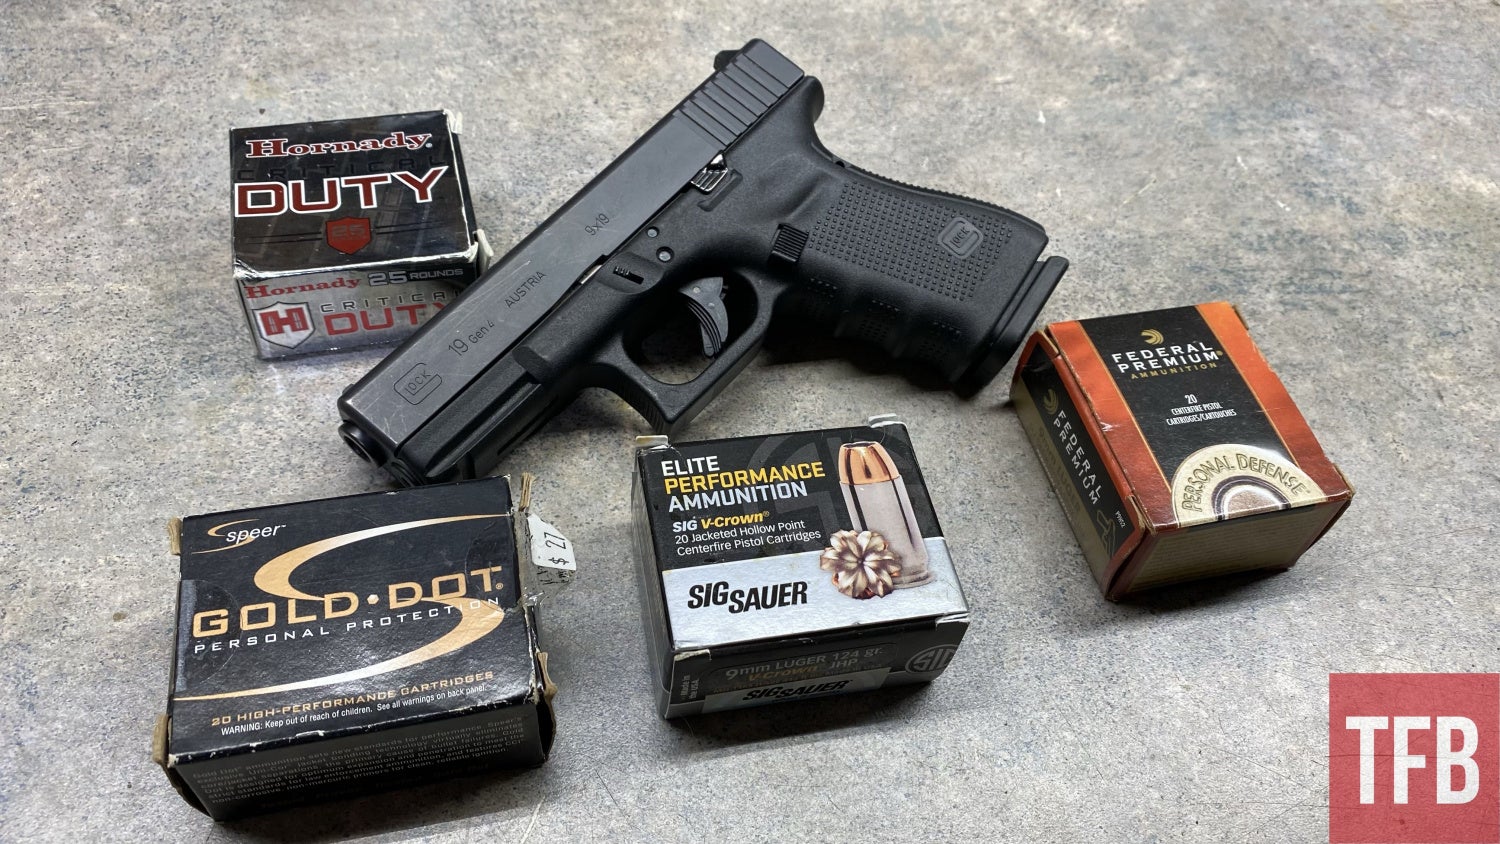 Concealed Carry Corner: Factory Ammo Vs Hand Loads